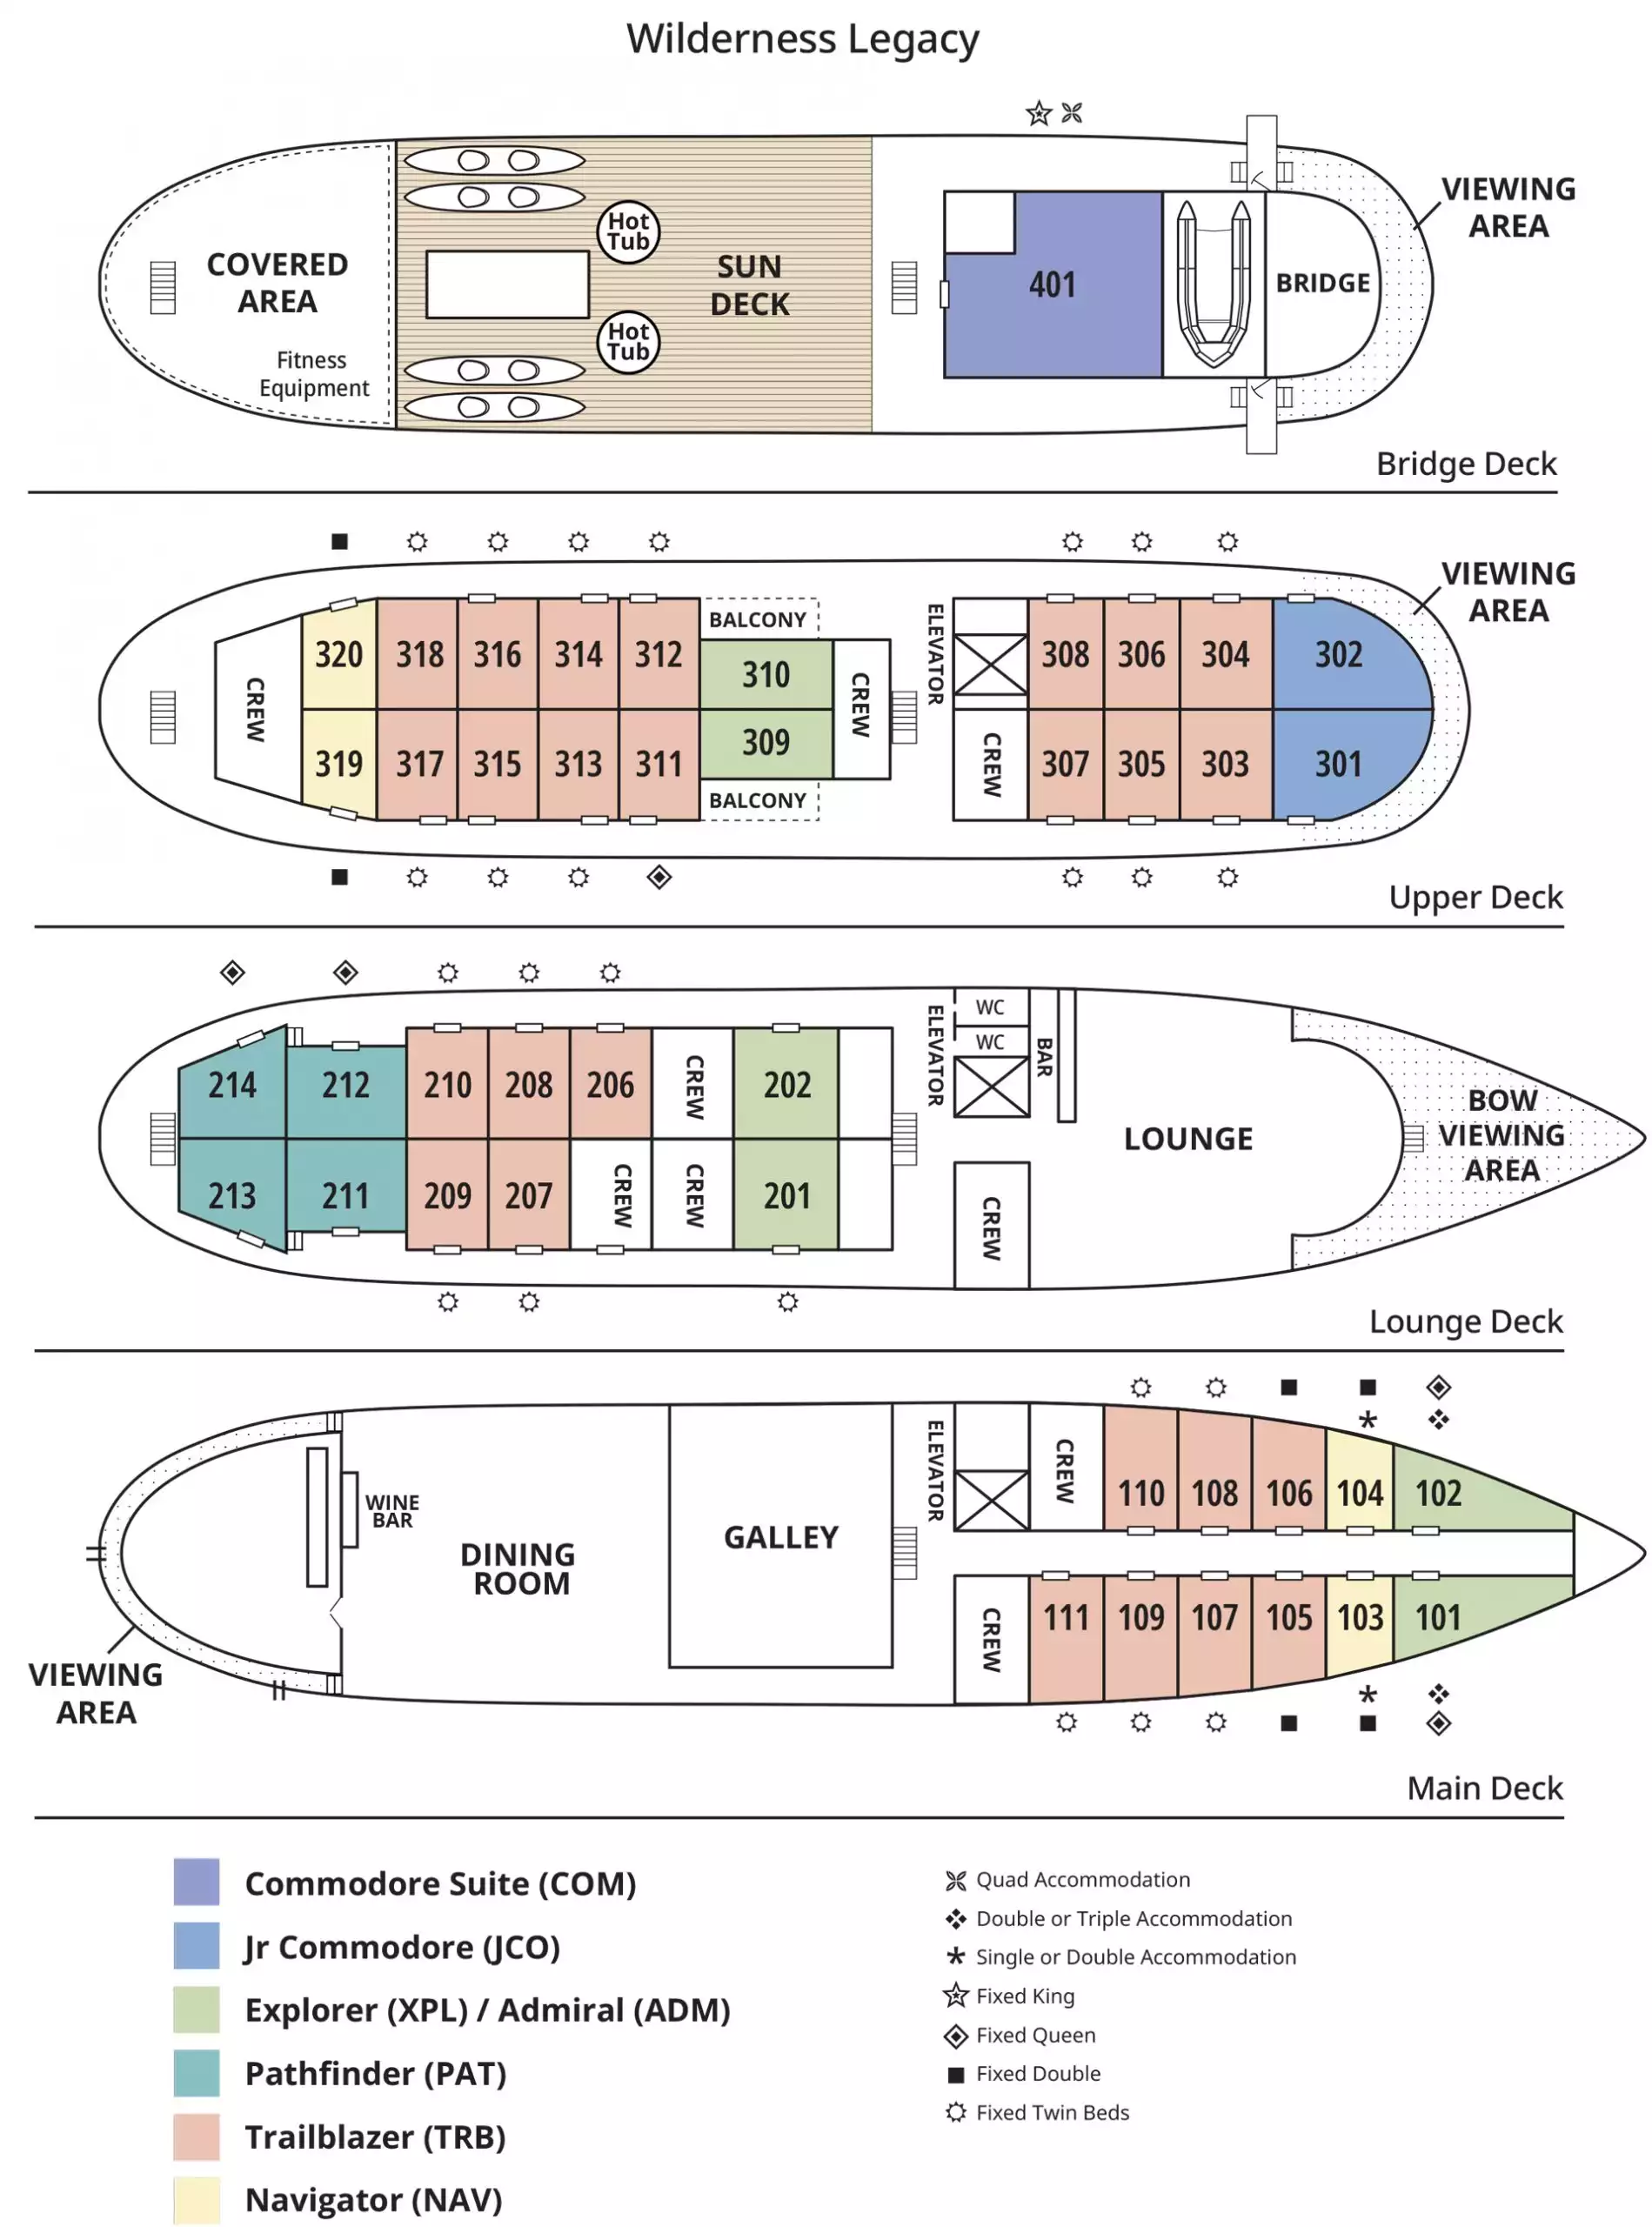 Deck plan of Wilderness Legacy small ship showing 4 guest decks, 6 color-coded cabin categories & bed configuration notes.